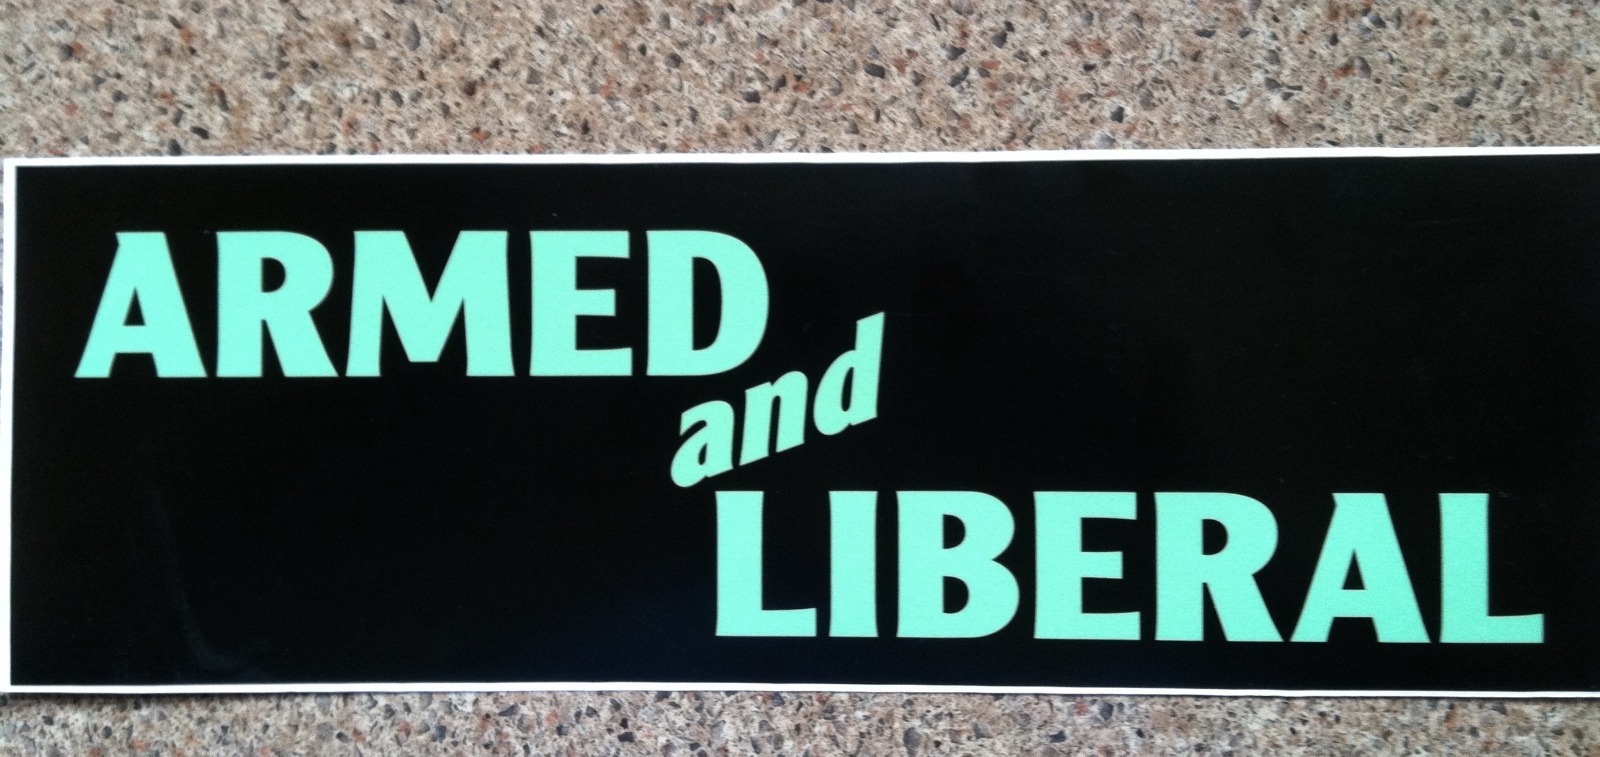 Crawford is revered by his friends for the number of thought-provoking, mischievous bumper stickers he's created over the years.   This one, which adorned the bumpers of many of his pals' vehicles (from pick-ups to Subarus), always turned heads.